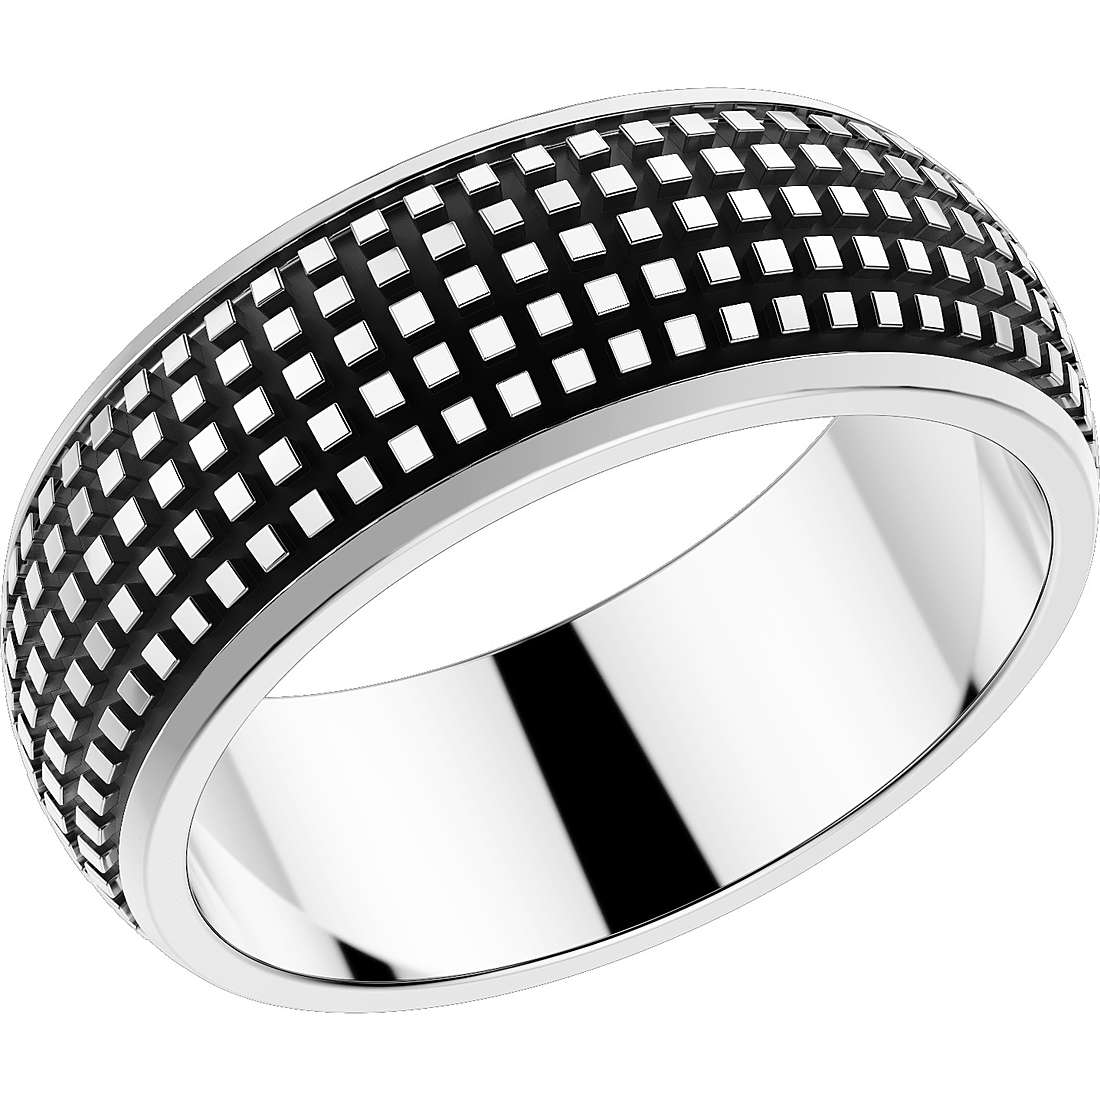 Square Patterned Ring | Zancan | Luby 